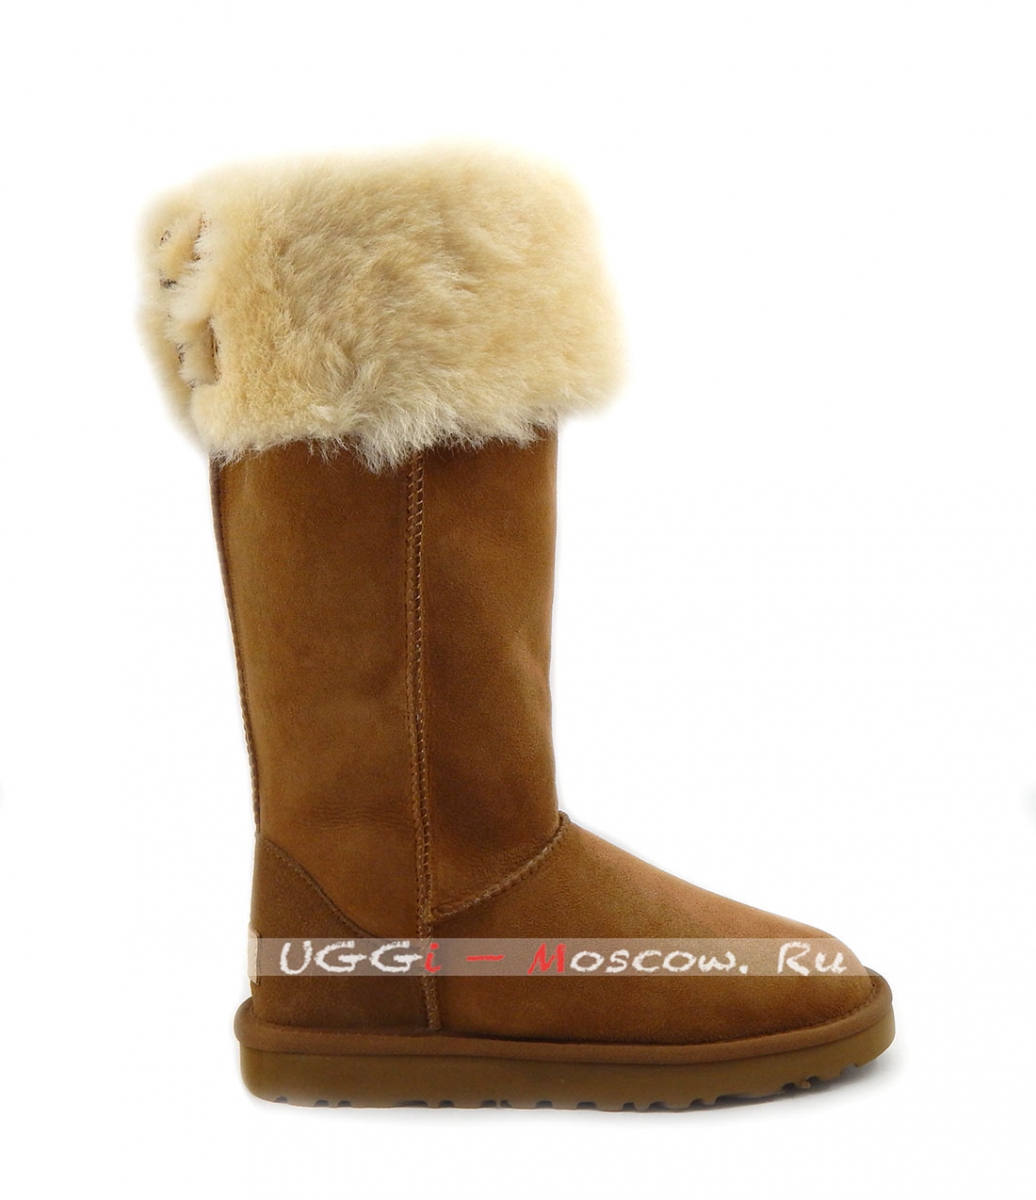 Ugg Boots Over The Knee Bailey Button 